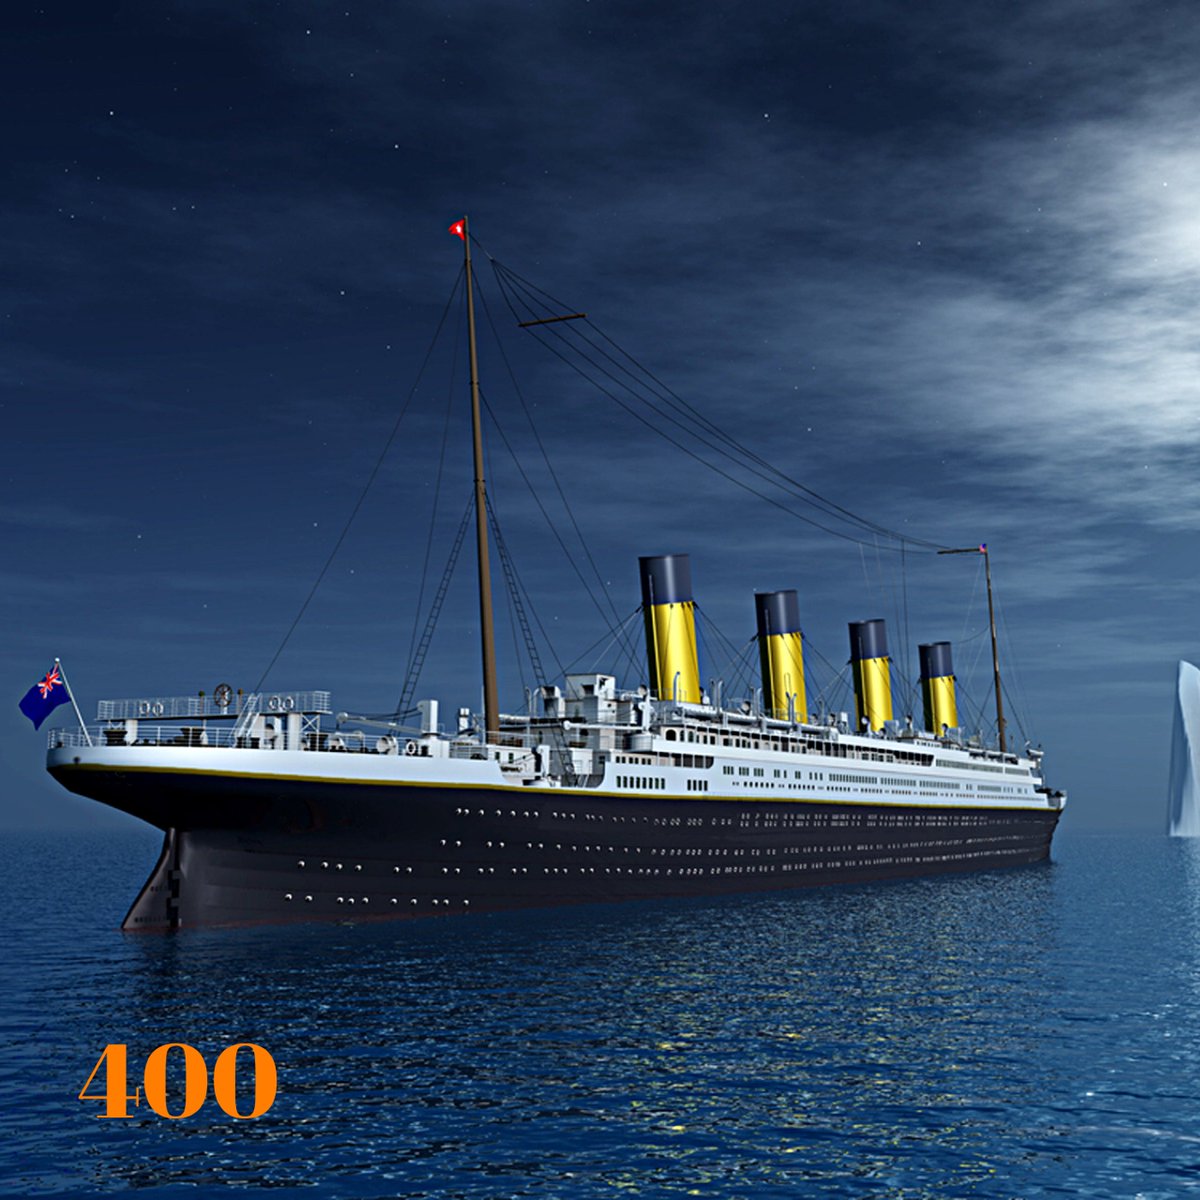 On April 15, 1912, RMS Titanic sank in the North Atlantic. Only 710 of 2,224 passengers and crew on board survived. Today also marks 400 days since Cllr Sarah Warren said she wanted a healthy debate on LTNs and how we get around in Bath. Still no signal from Cllr Warren.